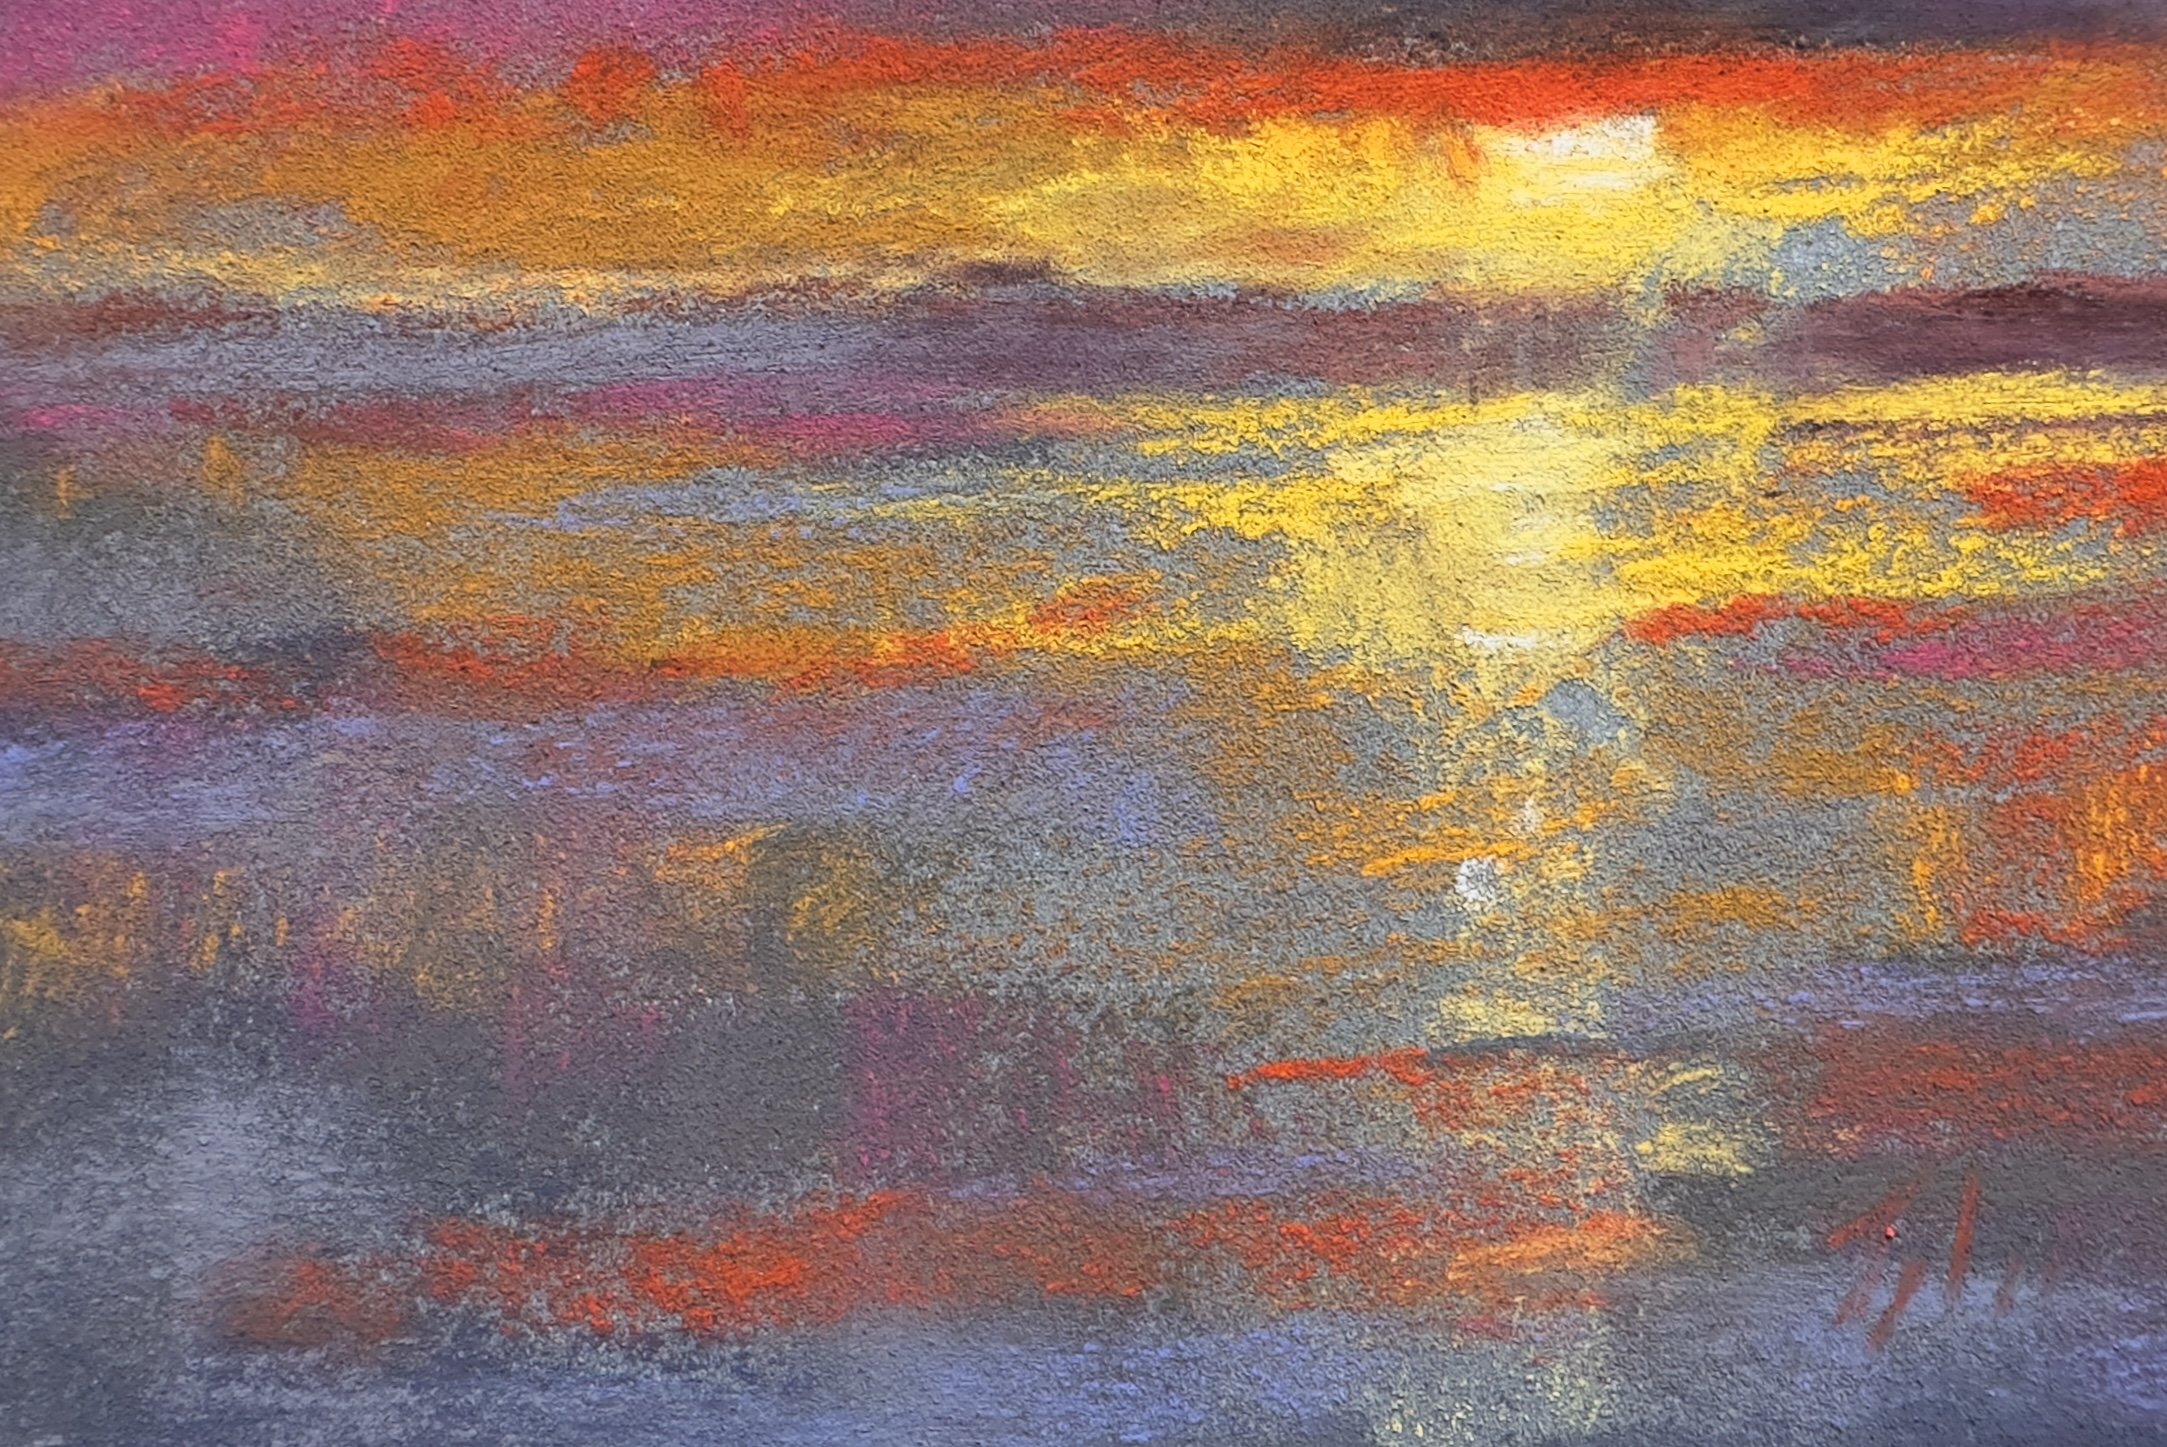  “Four Views of a Sunset: II”    pastel on sanded paper    4” x 6”    $150 